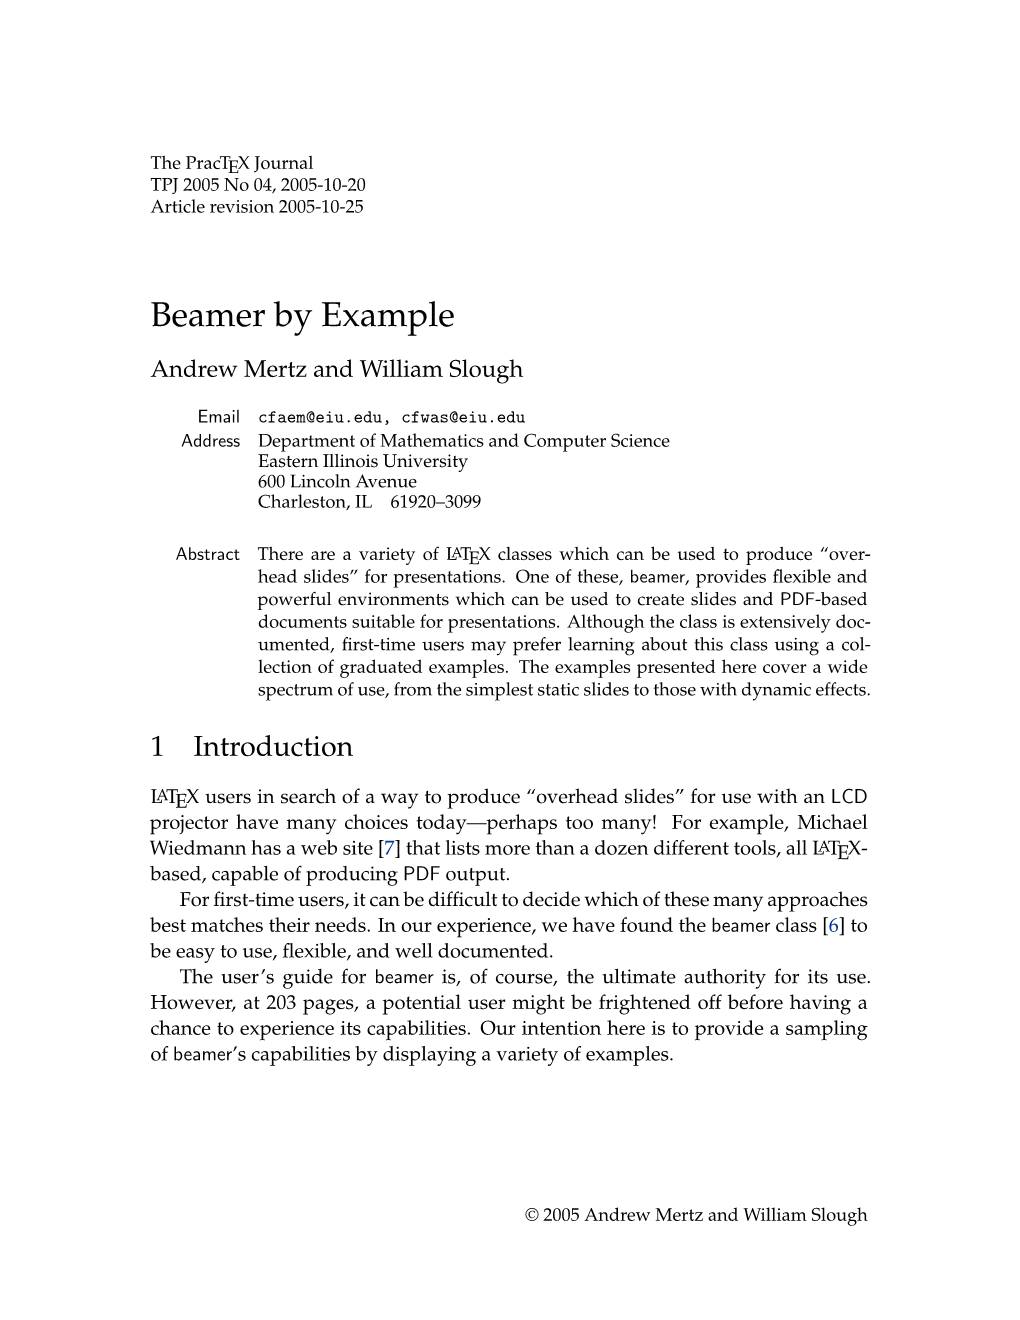 Beamer by Example Andrew Mertz and William Slough